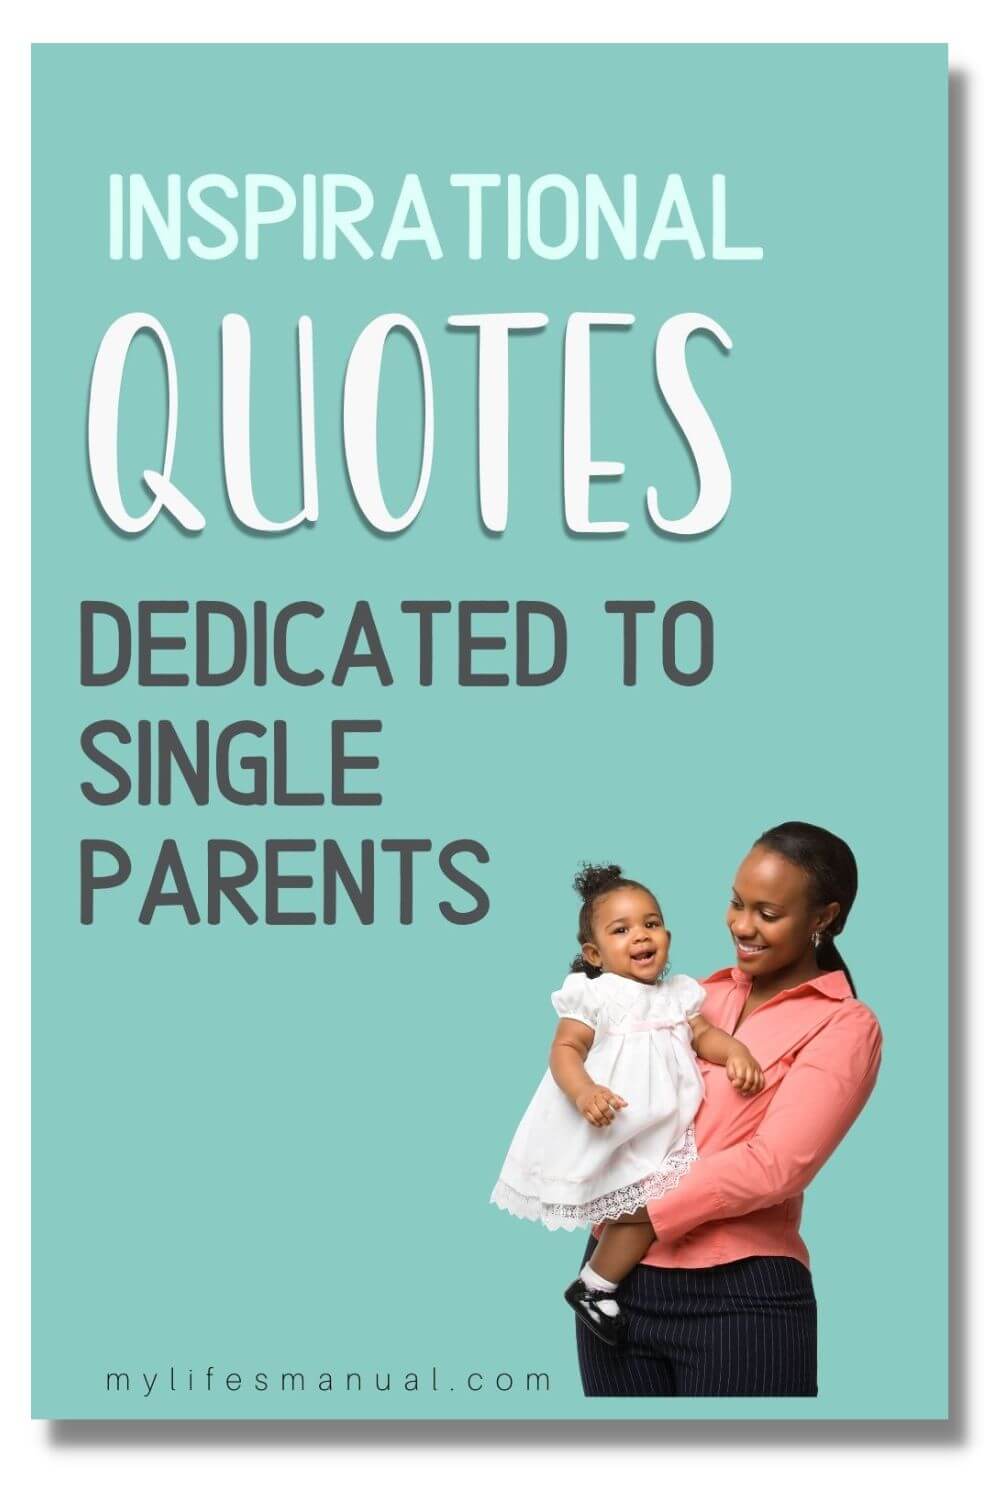 Inpirational quotes dedicated for single parents